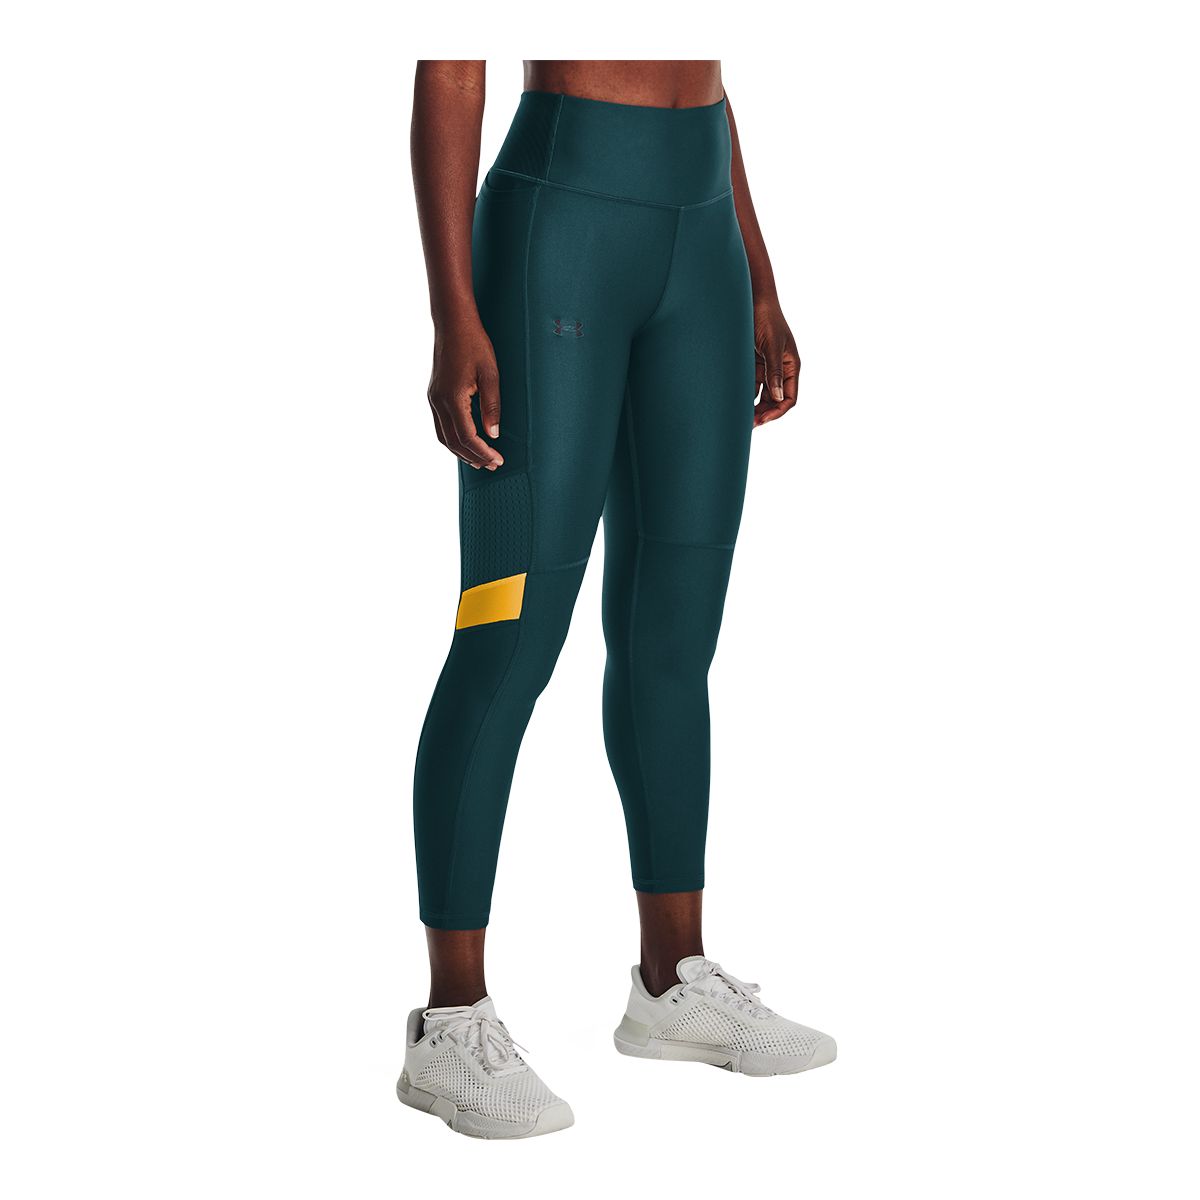 Under Armour Women's Seasonal Ankle Tights